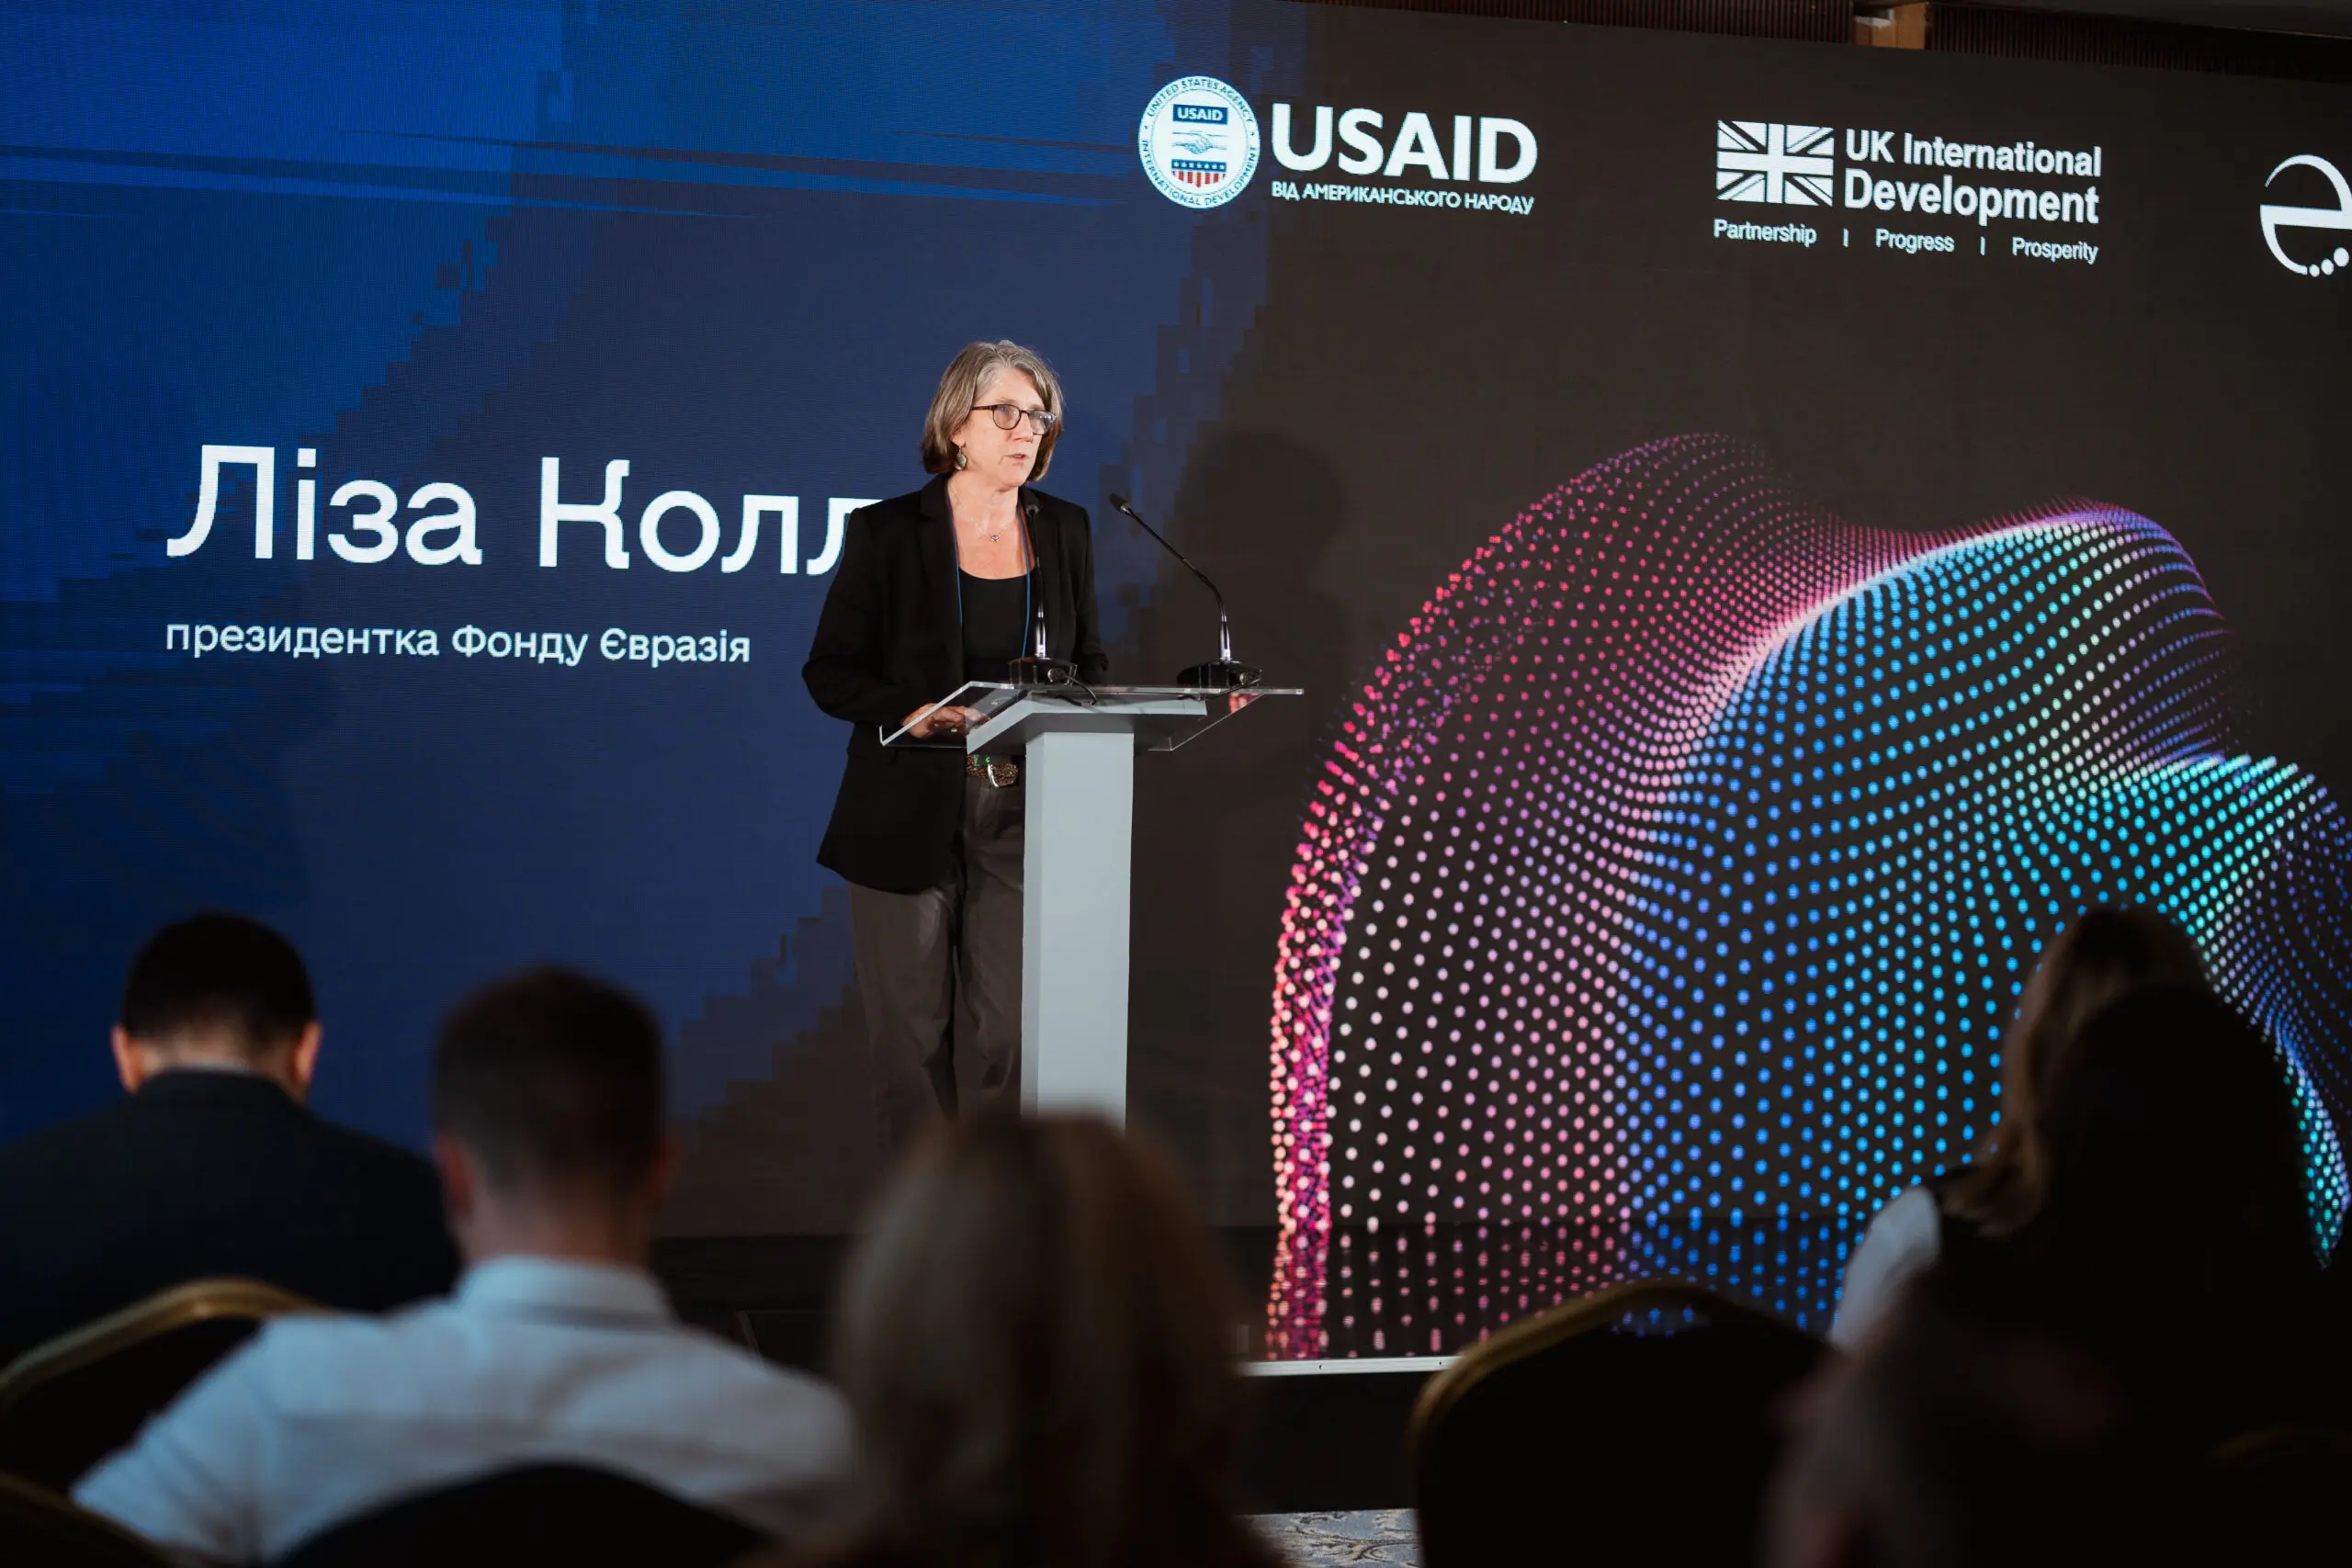 Lisa Coll, EF president, addresses the crowd at the Ukraine Digital Transformation Activity launch event. A screen spanning the stage behind her shows her name in Ukrainian with the USAID and UK Dev logos.